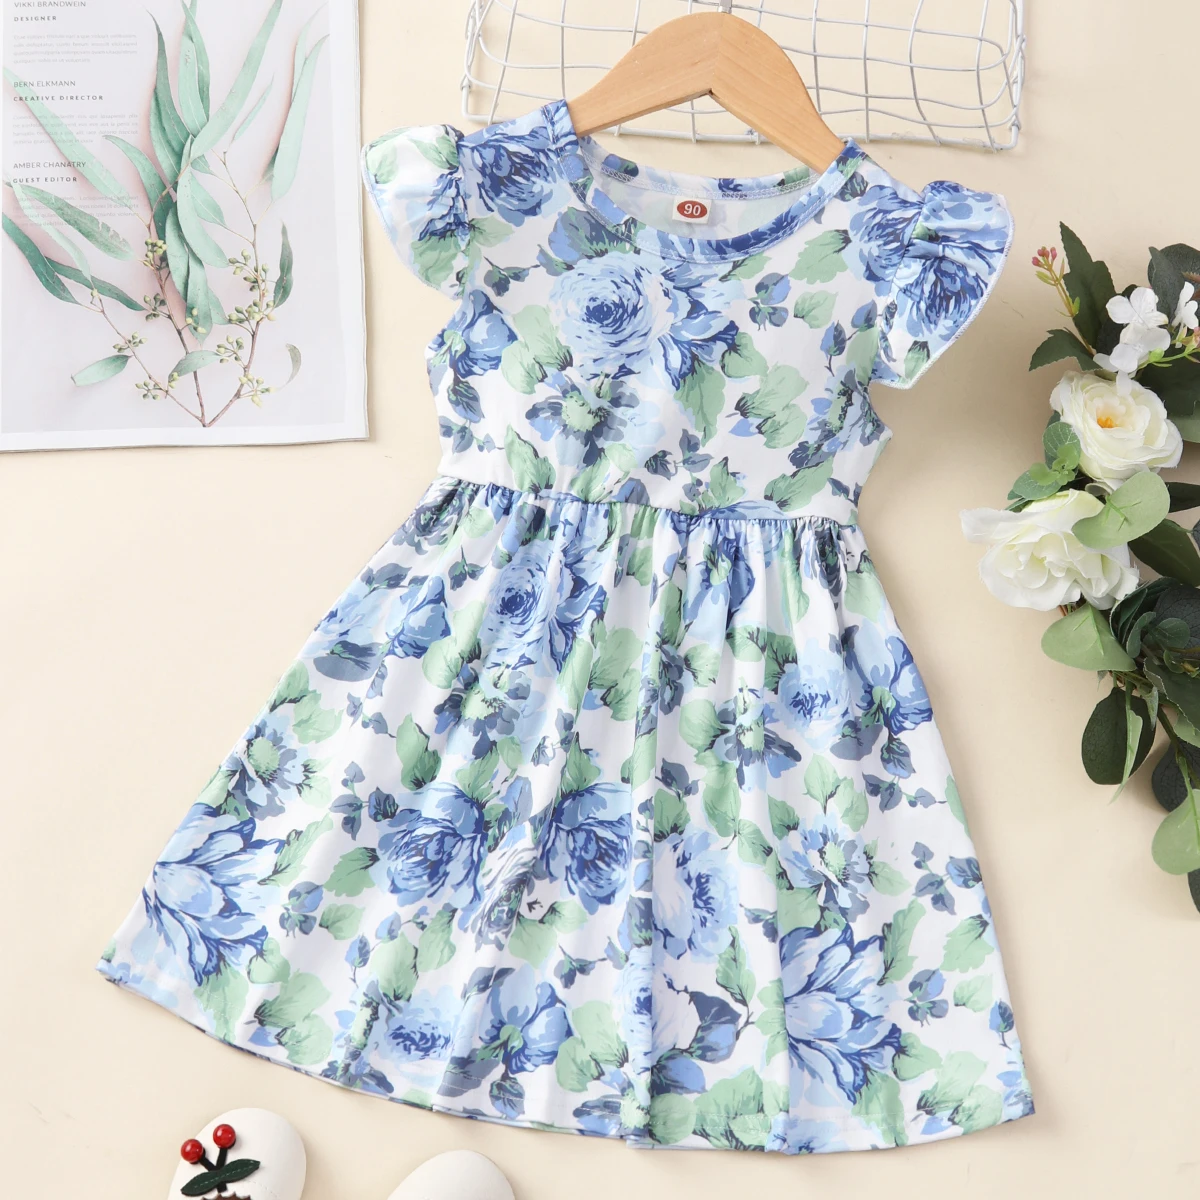 

Girls Kids Dresses Spring Summer New Girls Lace Sleeve Floral Ruffles Pretty Dress Soft Fashion Clothes Vestidos 1 to 7 Years